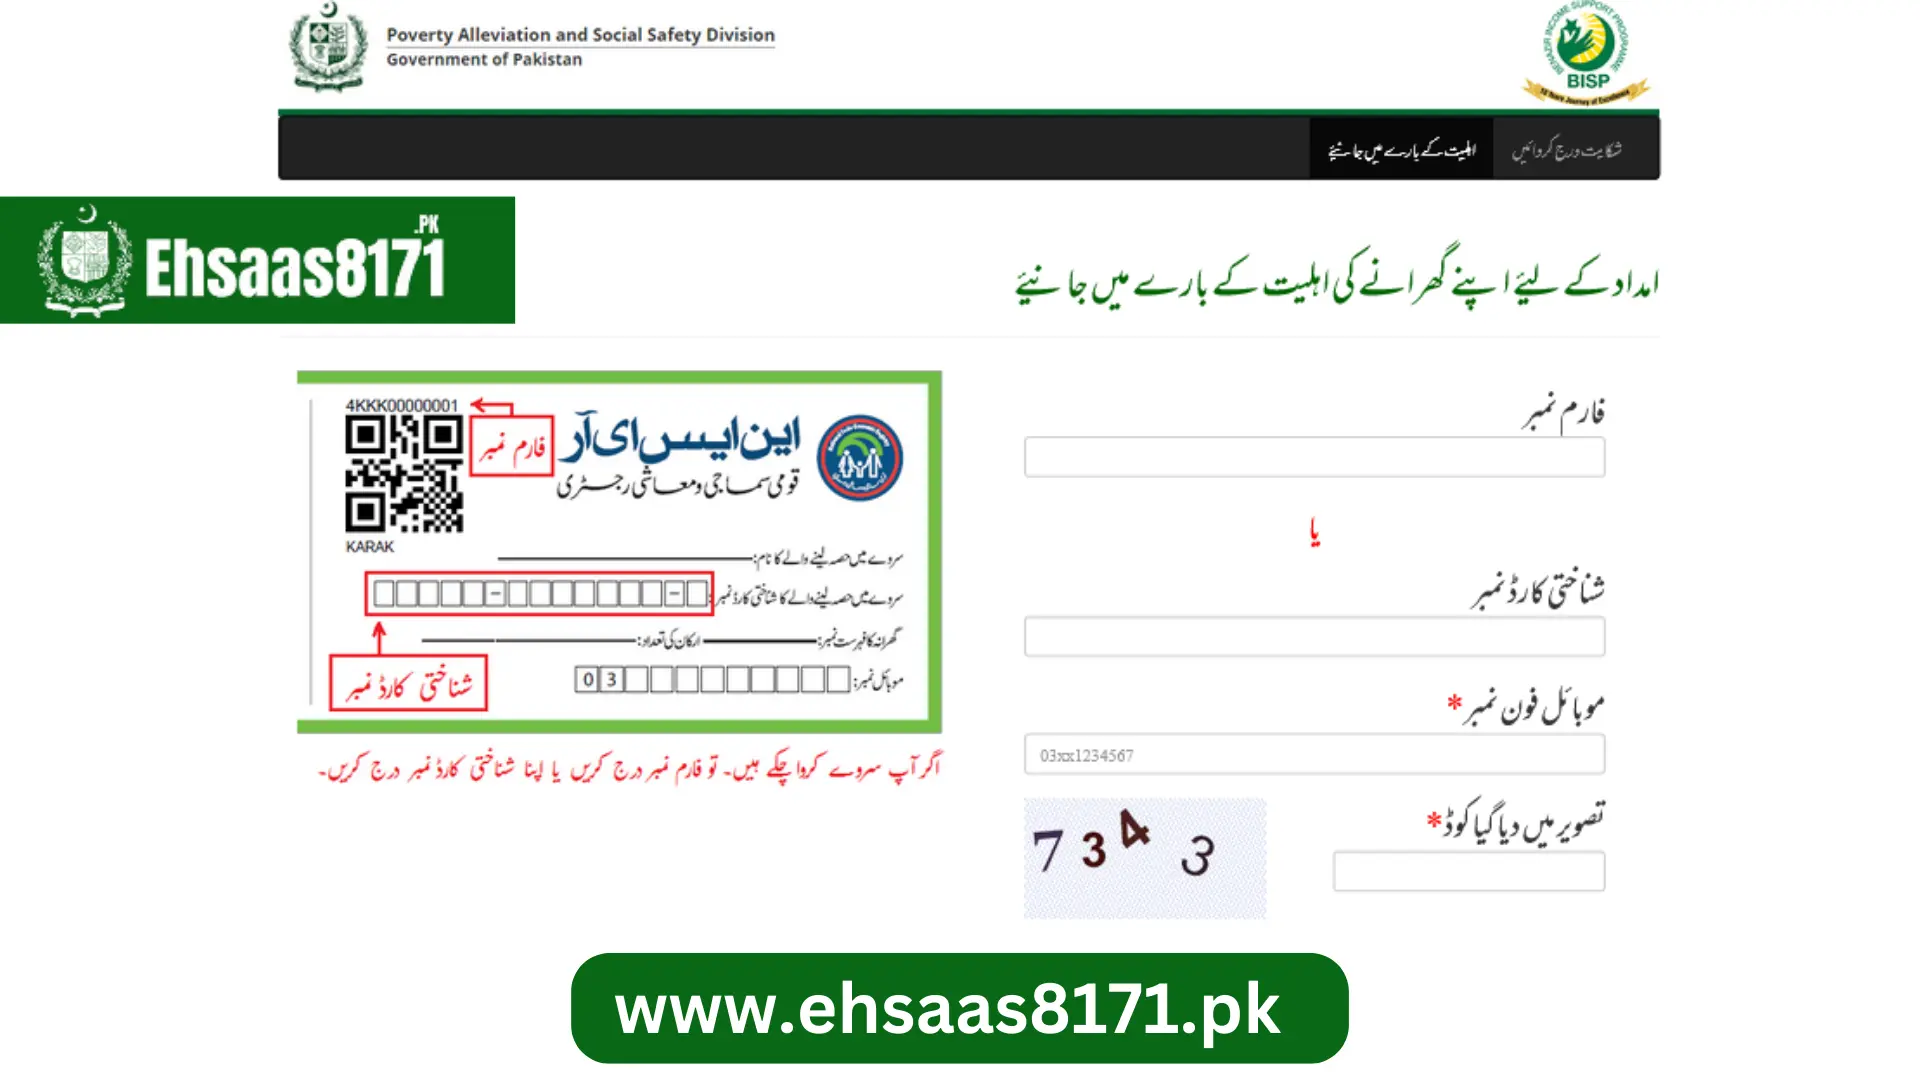 Process of registration for cash of Ehsaas tracking